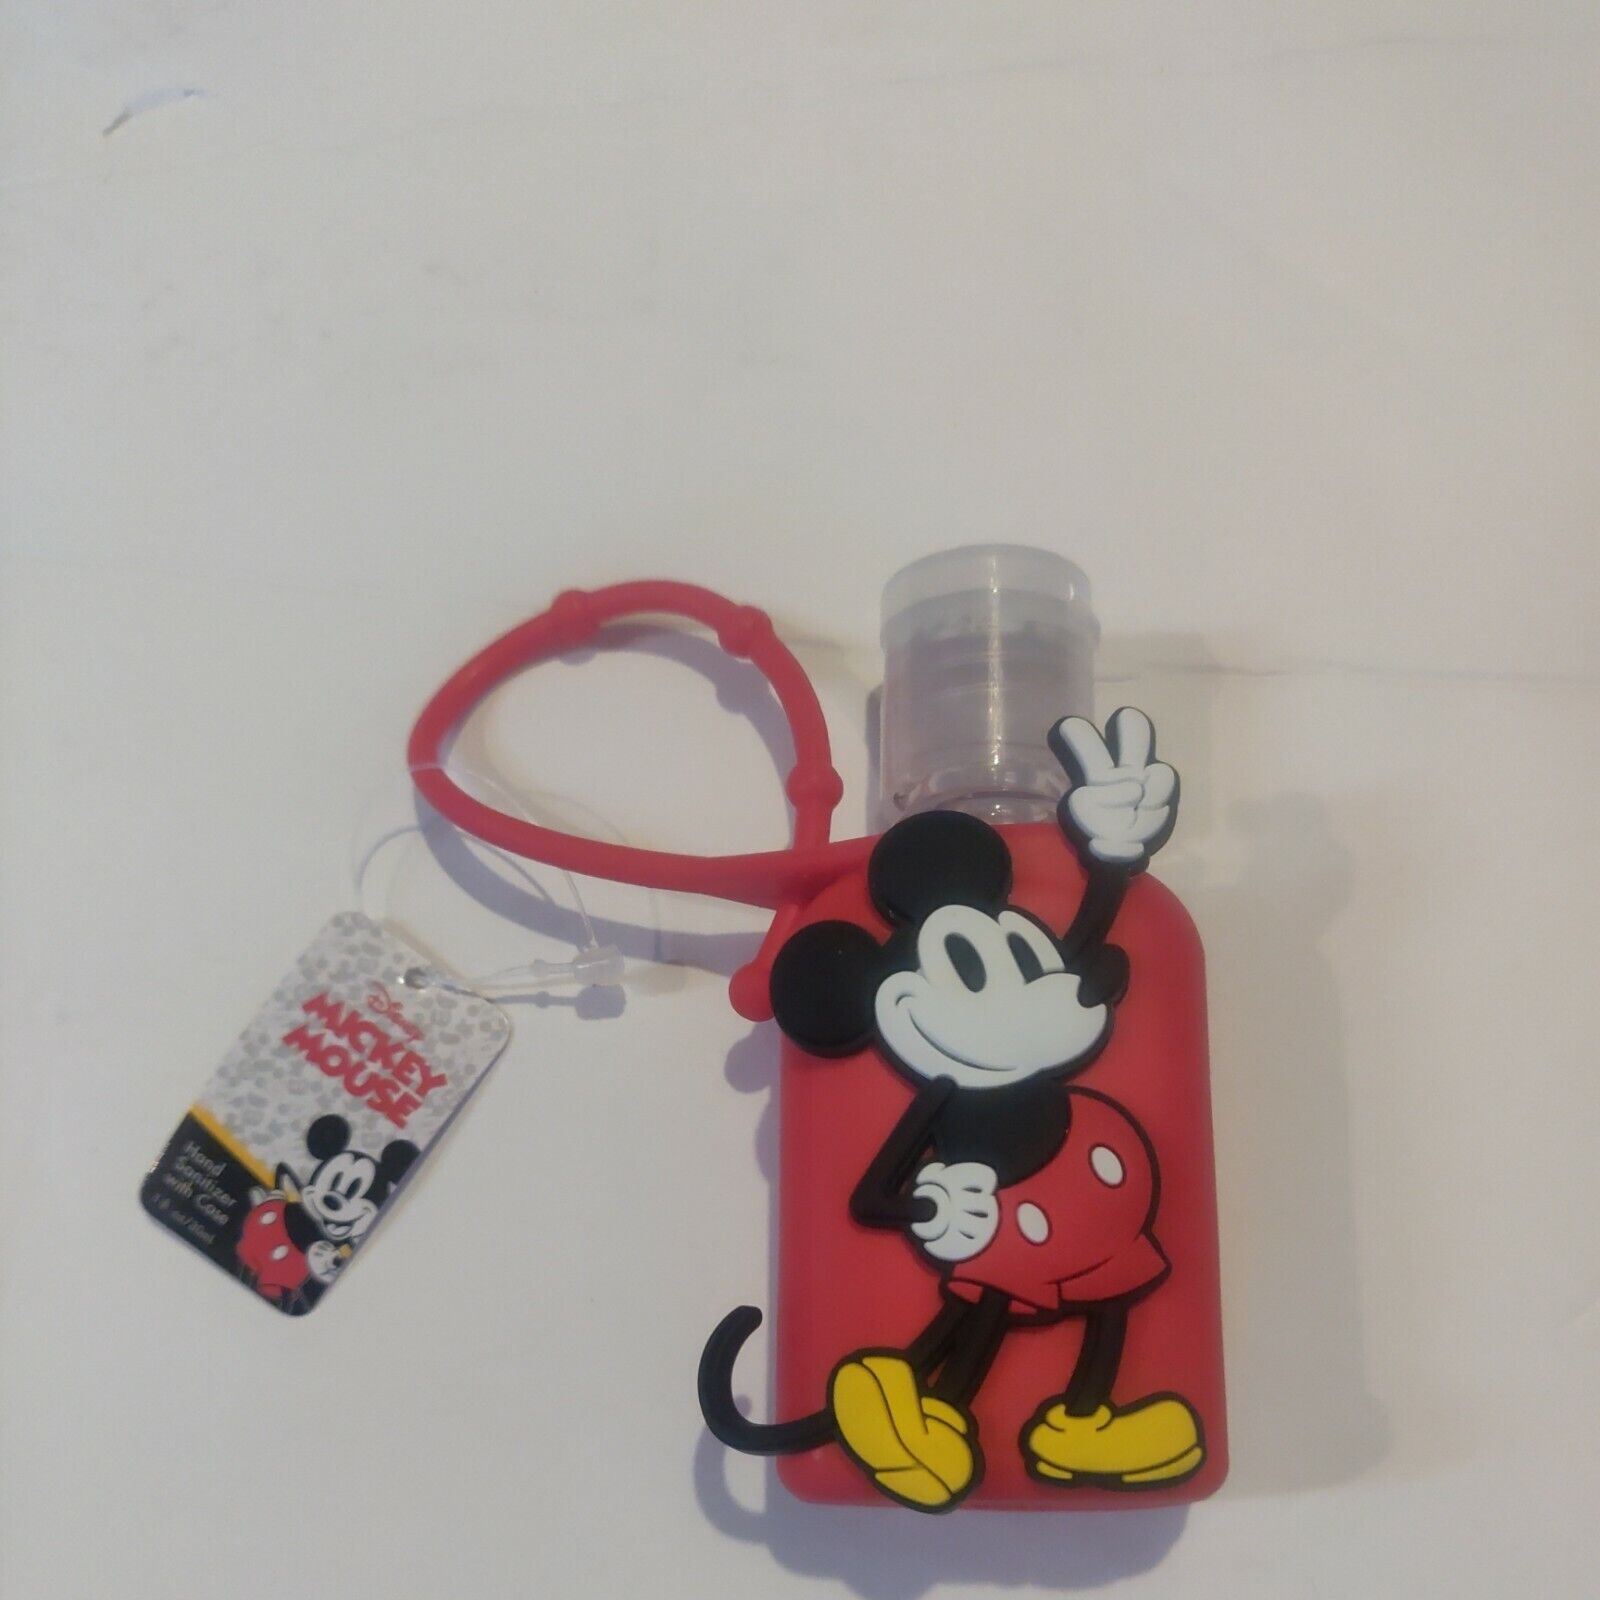 Disney Mickey Mouse Sanitizer Refillable 1floz/ Red Case New With Tag